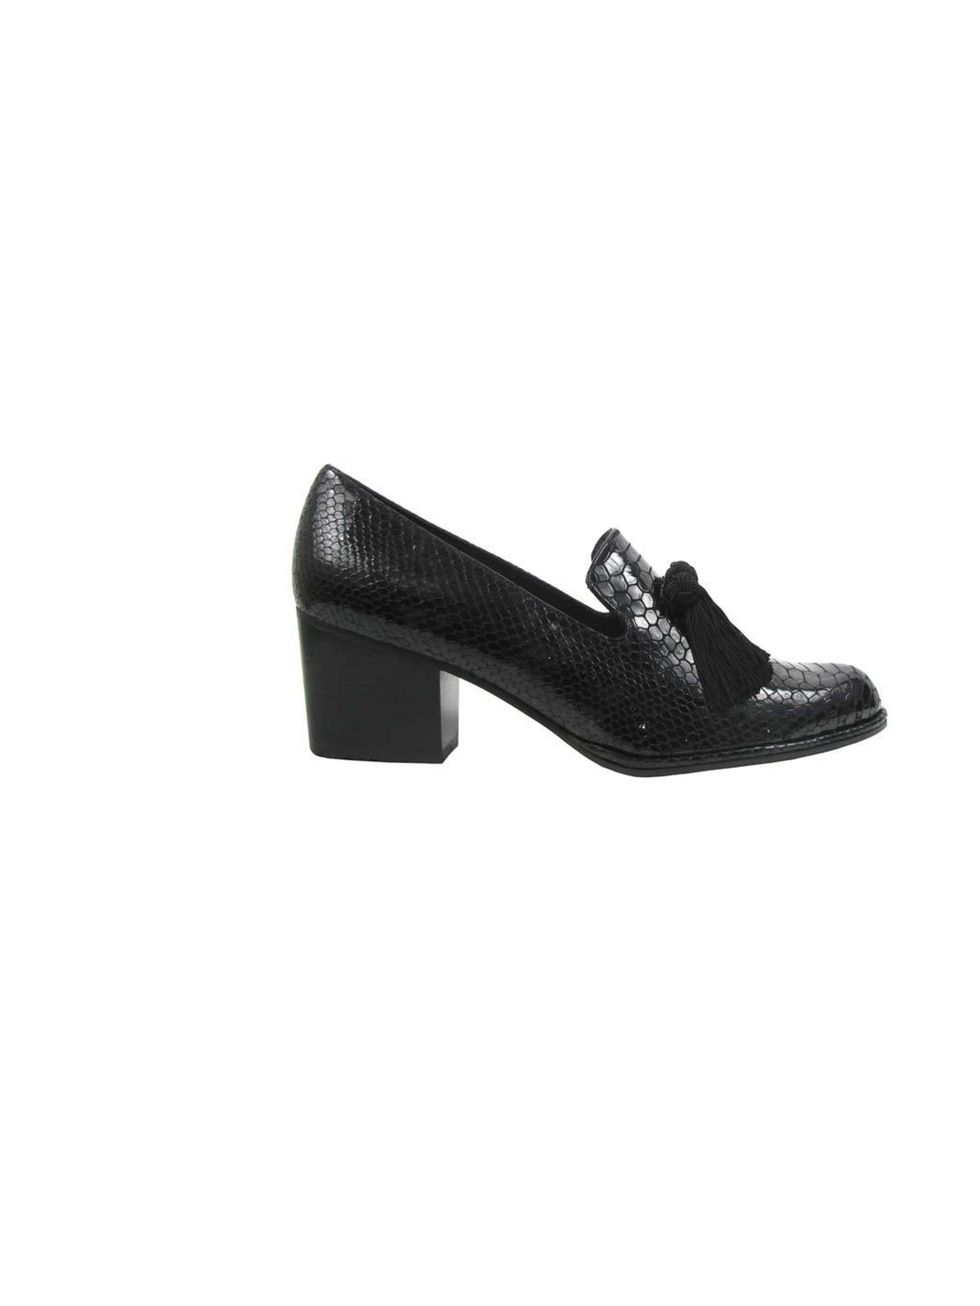 <p>These <a href="http://www.russellandbromley.co.uk/heels/razmataz/invt/235239/">Russell &amp; Bromley</a> loafers are comfortable and easy to wear. In store now for £235</p>